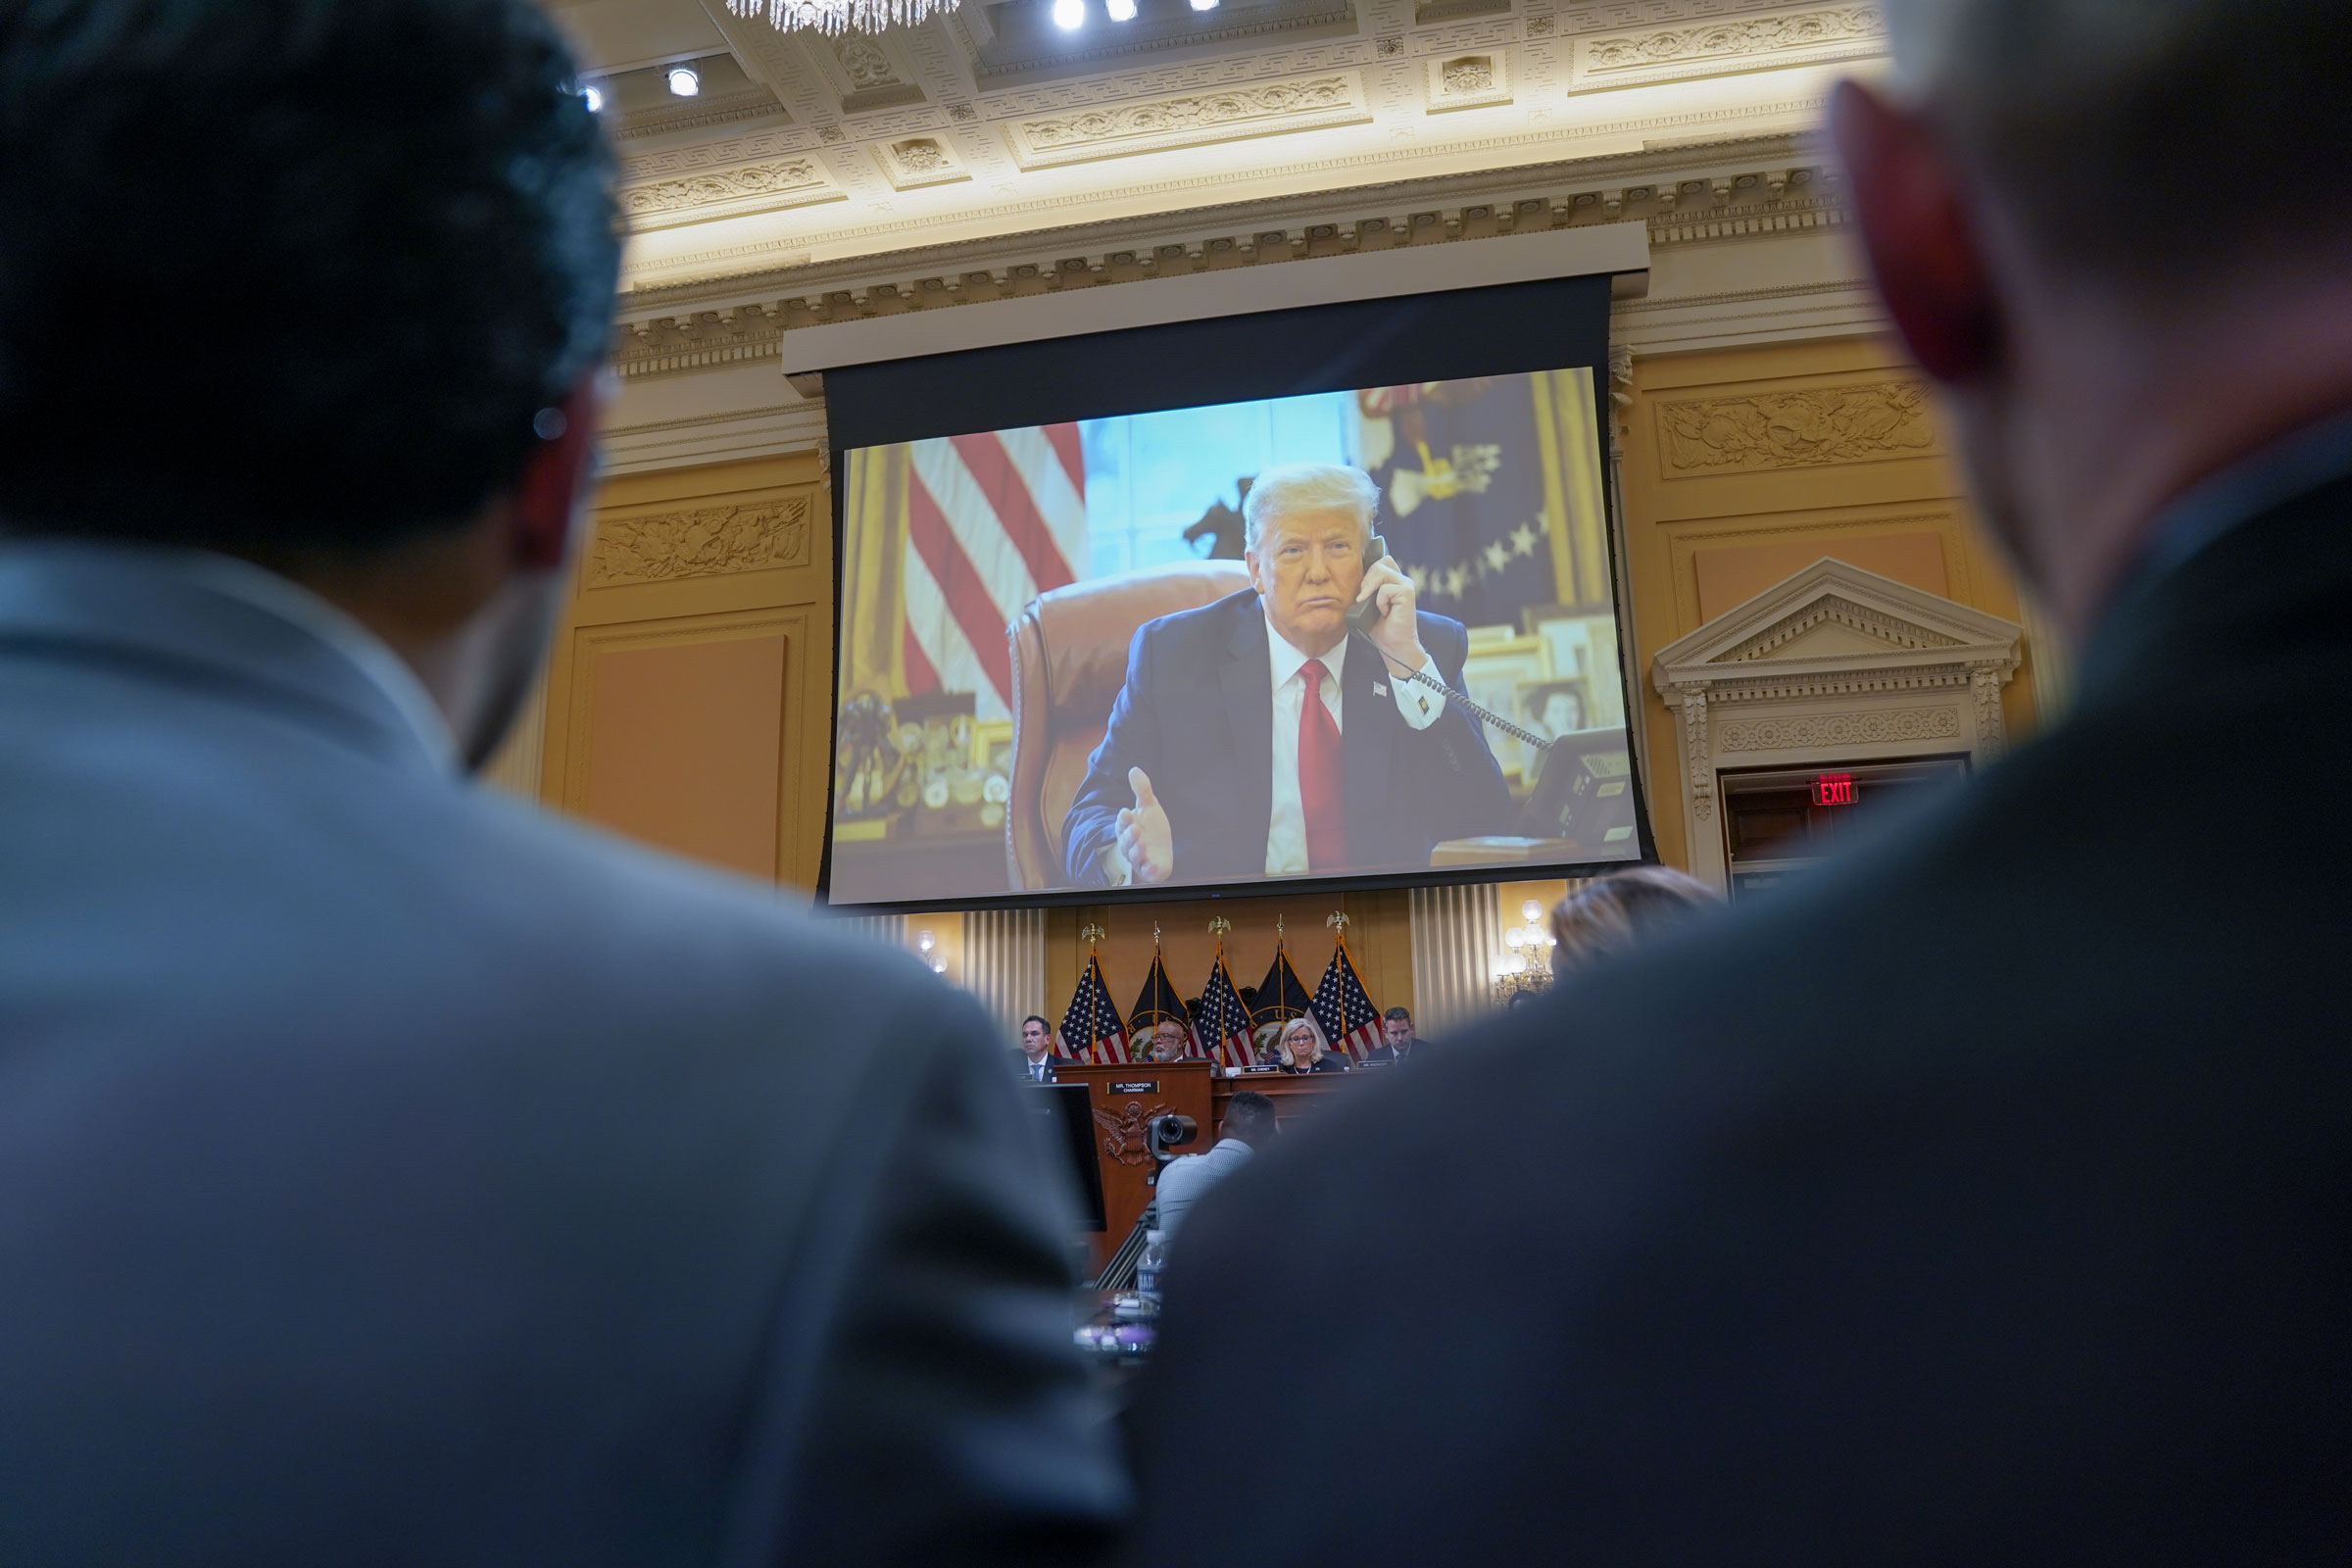 Photos of then-President Trump are shown during a House Select Committee to Investigate the January 6th hearing in the Cannon House Office Building in Washington, D.C. on Thursday, June 16, 2022. (Kent Nishimura—Los Angeles Times/Getty Images)